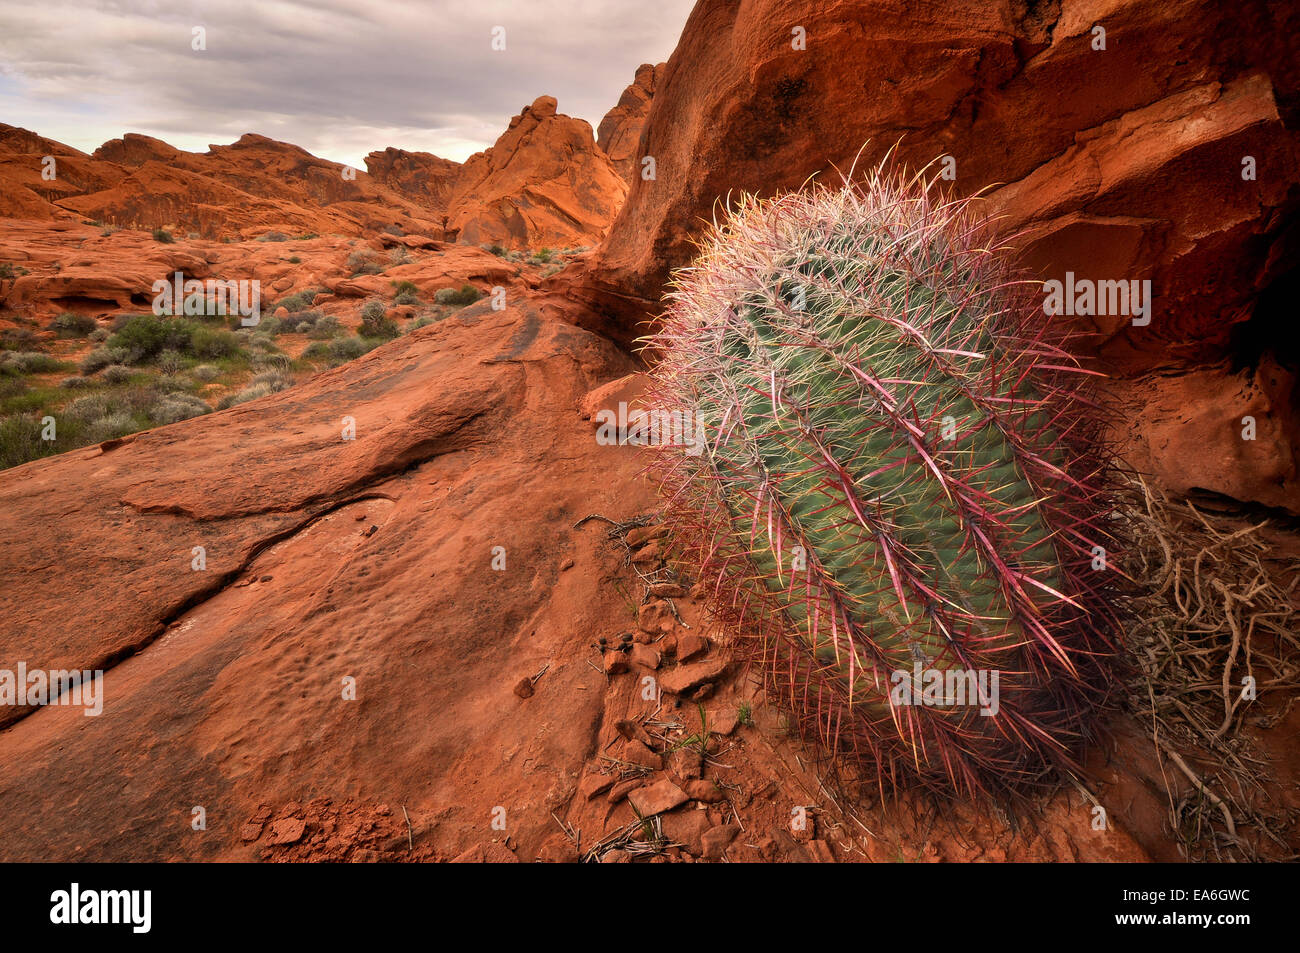 USA, Nevada, Valley of Fire State Park, Barrel Cactus and Sandstone Stock Photo